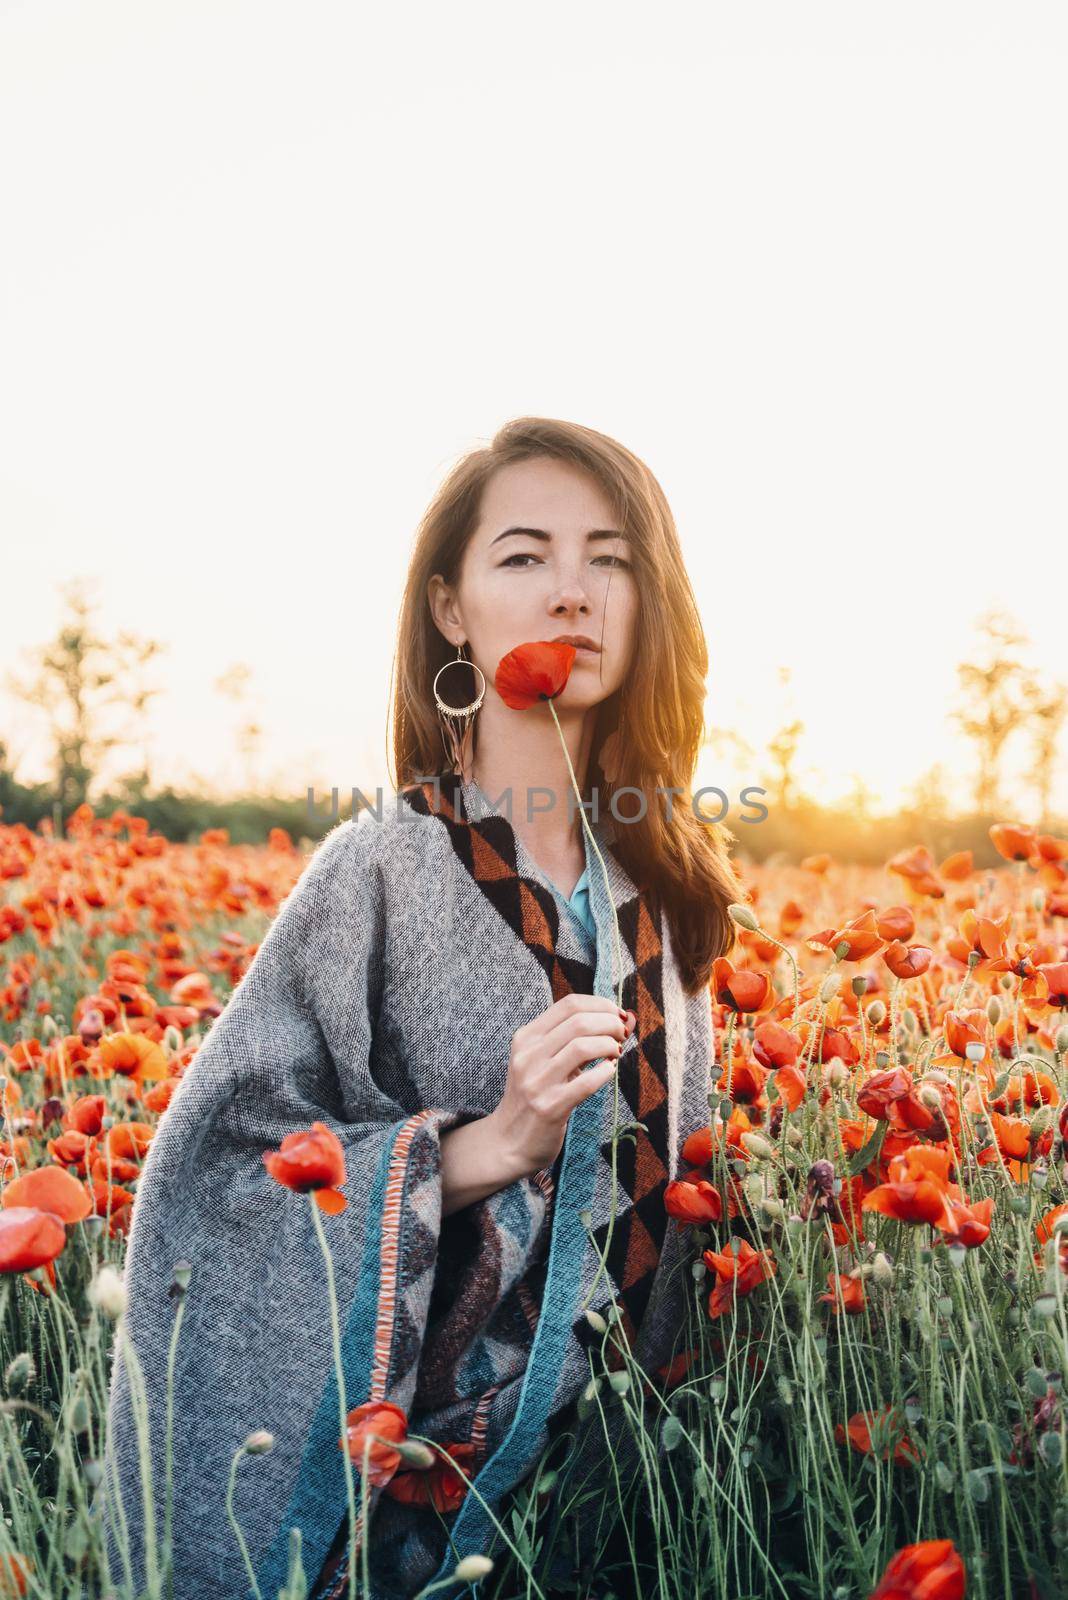 Attractive brunette young woman with long hair standing with one poppy in flower field at sunset in summer outdoor.